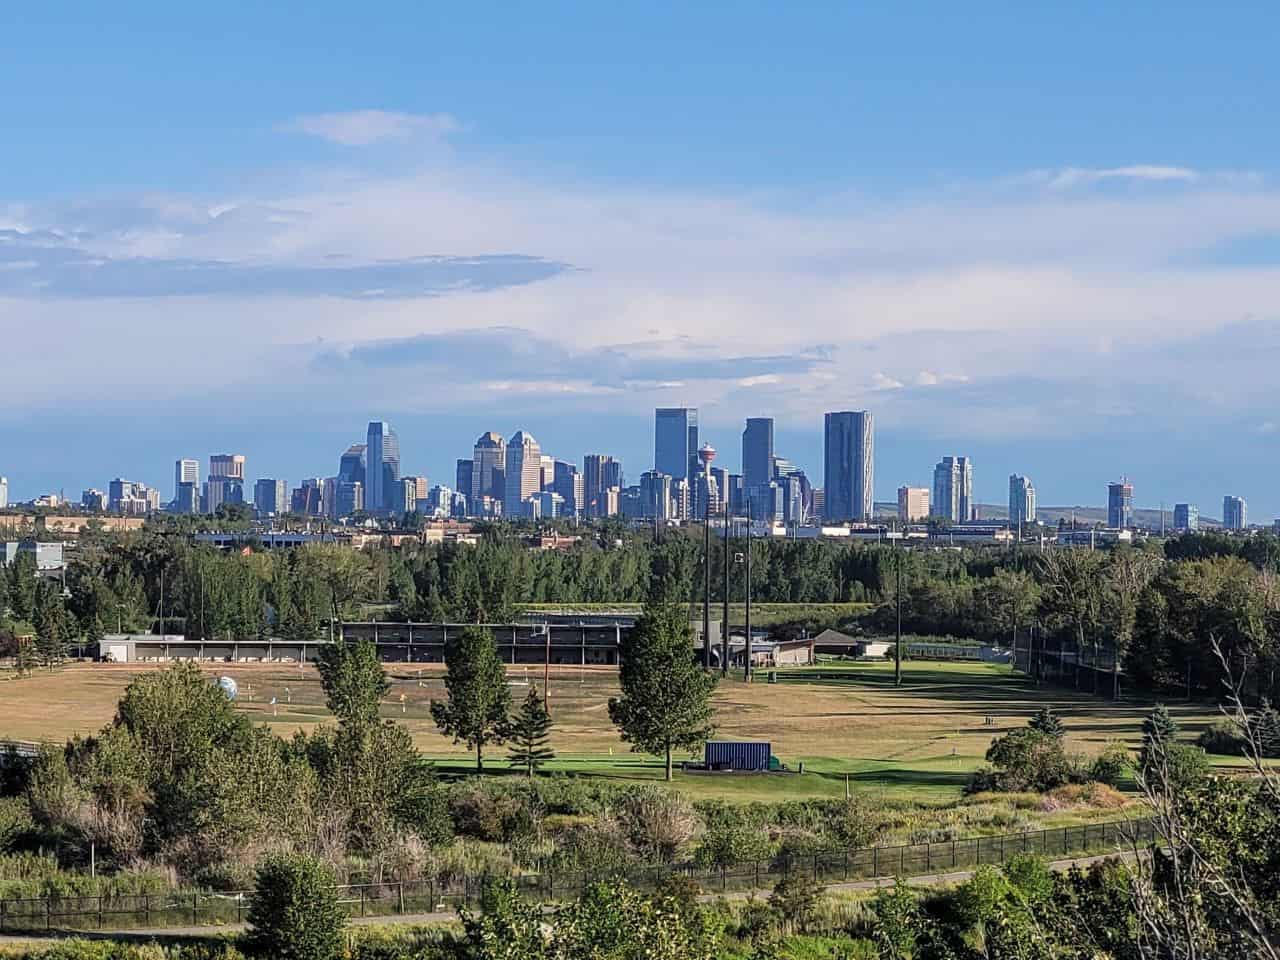 The City of Calgary Trails take hikers and cyclists to several viewpoints that provide breathtaking views of the cityscape and Bow River Valley.